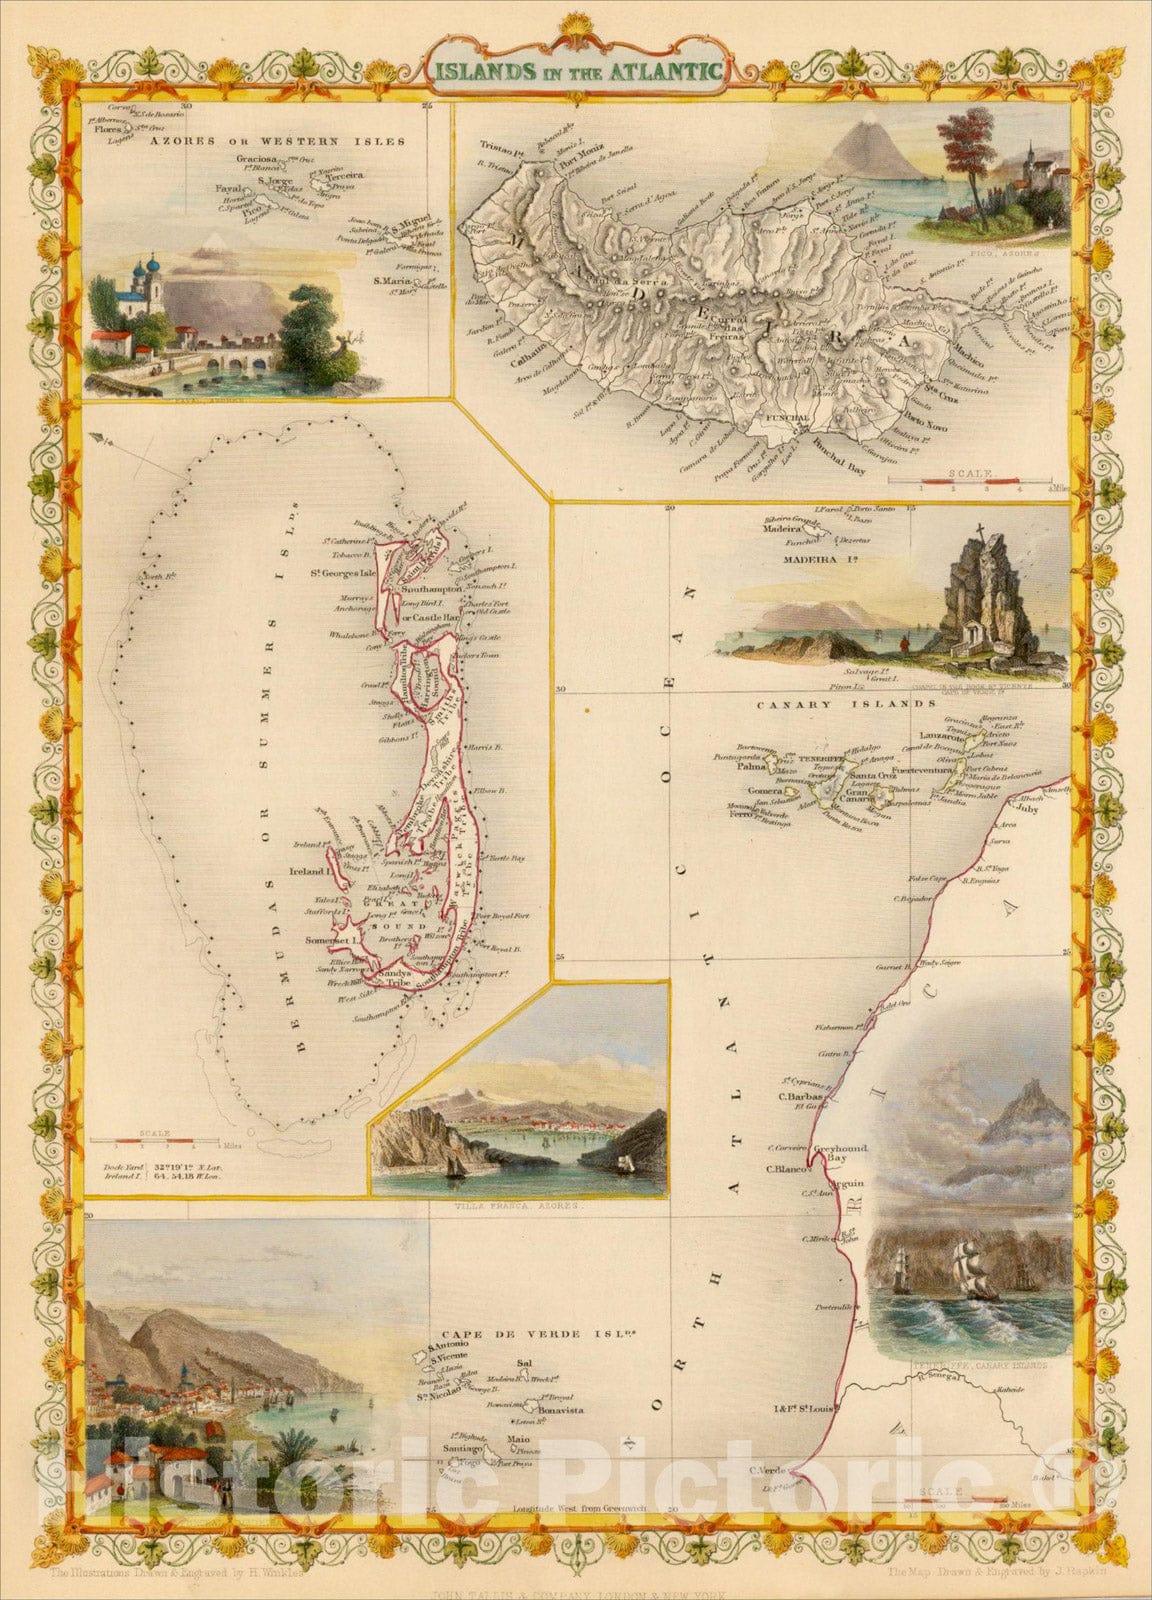 Historic Map : Islands in the Atlantic [Bermuda, Madeira, Canaries, Azores and Cape Verde Islands], 1851, John Tallis, v1, Vintage Wall Art